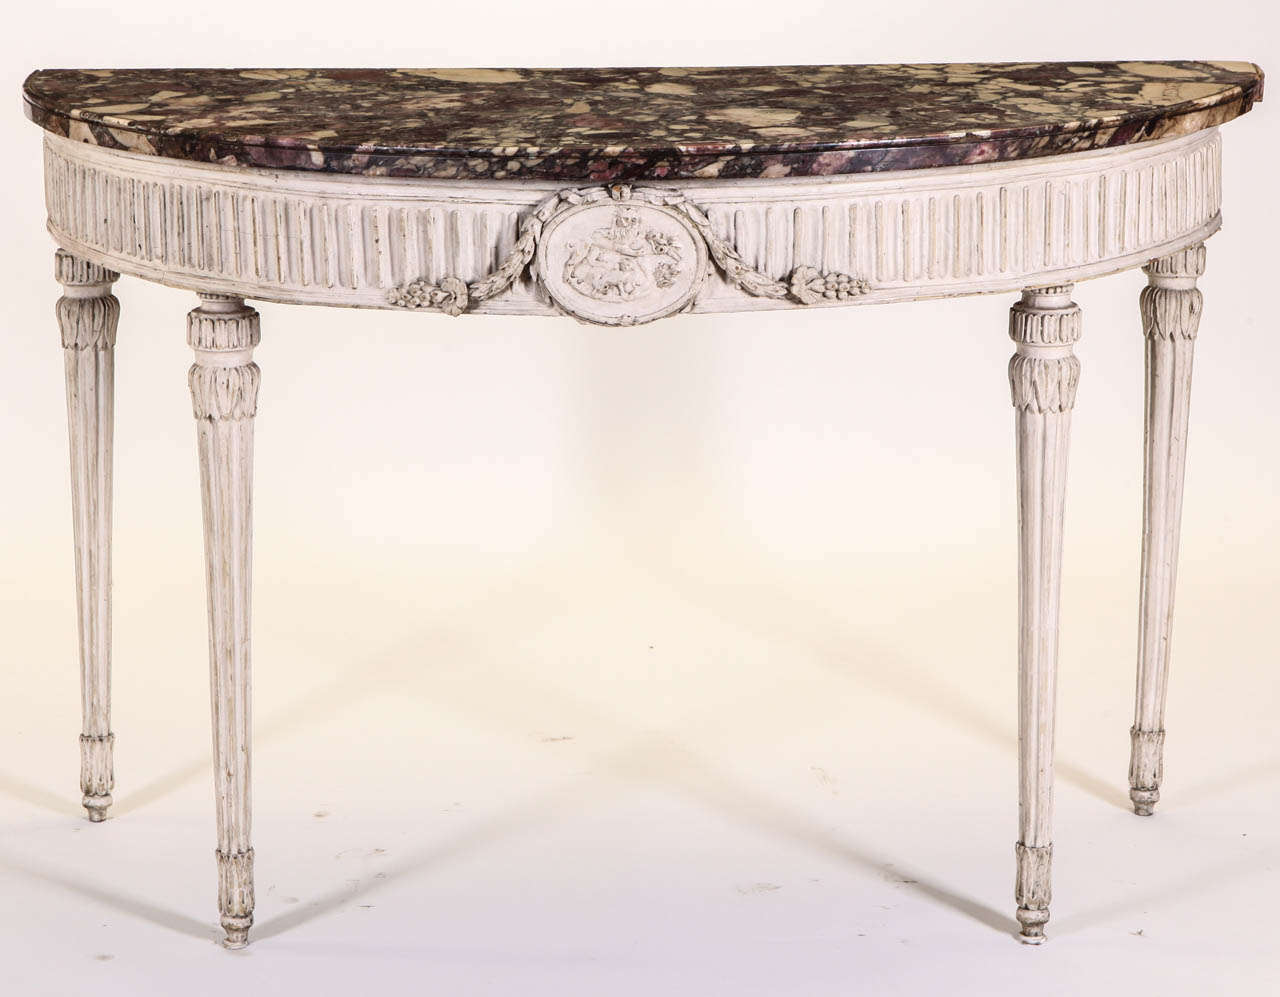 Hand-Painted  Italian 18' century Demi-lune Ivory Painted Console Table Louis XVI period